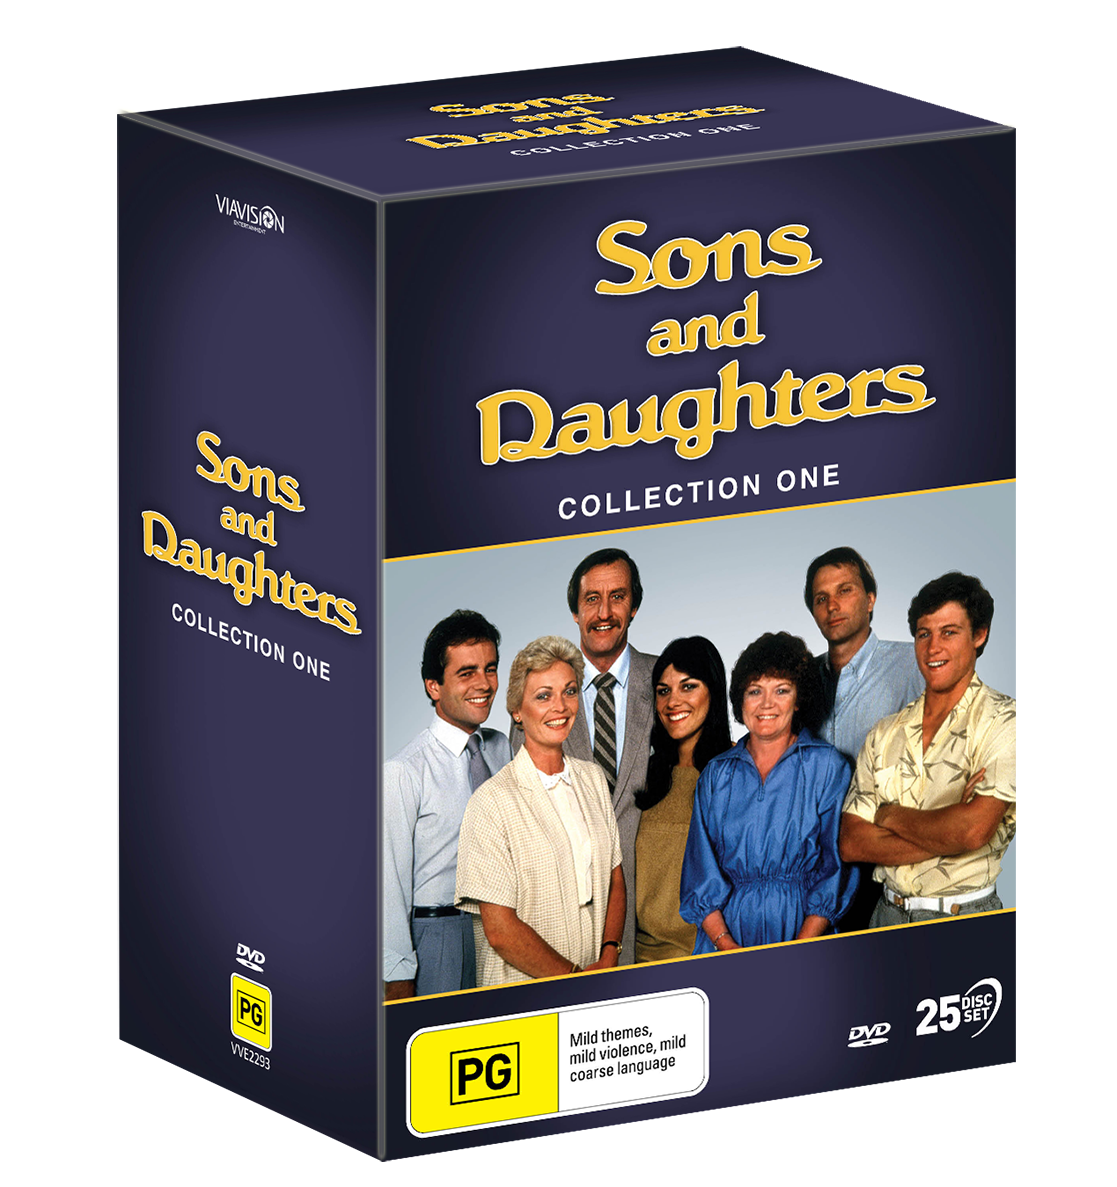 Sons And Daughters Collection One Via Vision Entertainment 5096